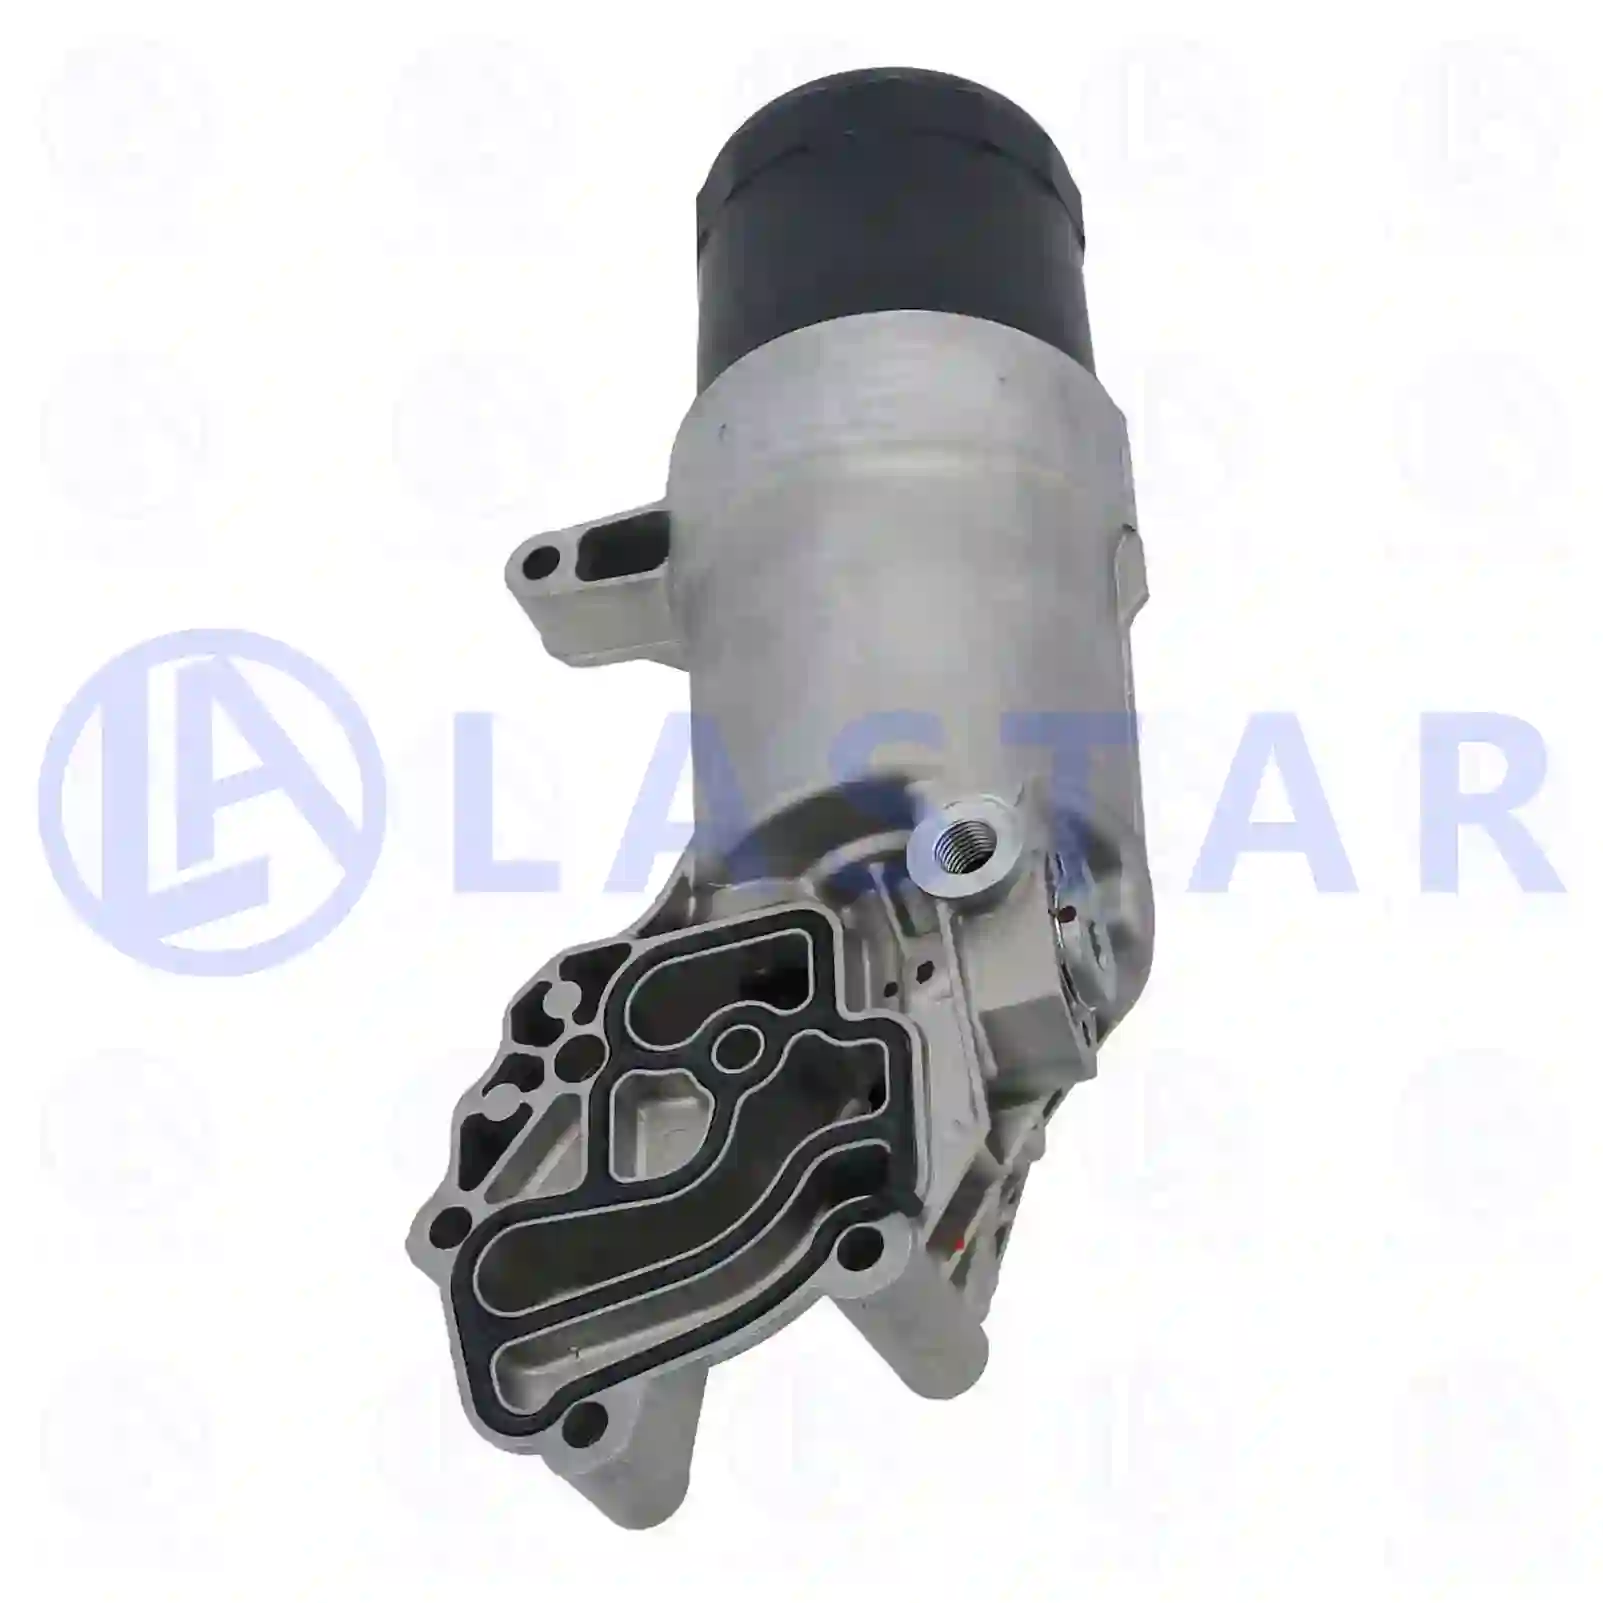  Oil filter housing, complete, with filter || Lastar Spare Part | Truck Spare Parts, Auotomotive Spare Parts